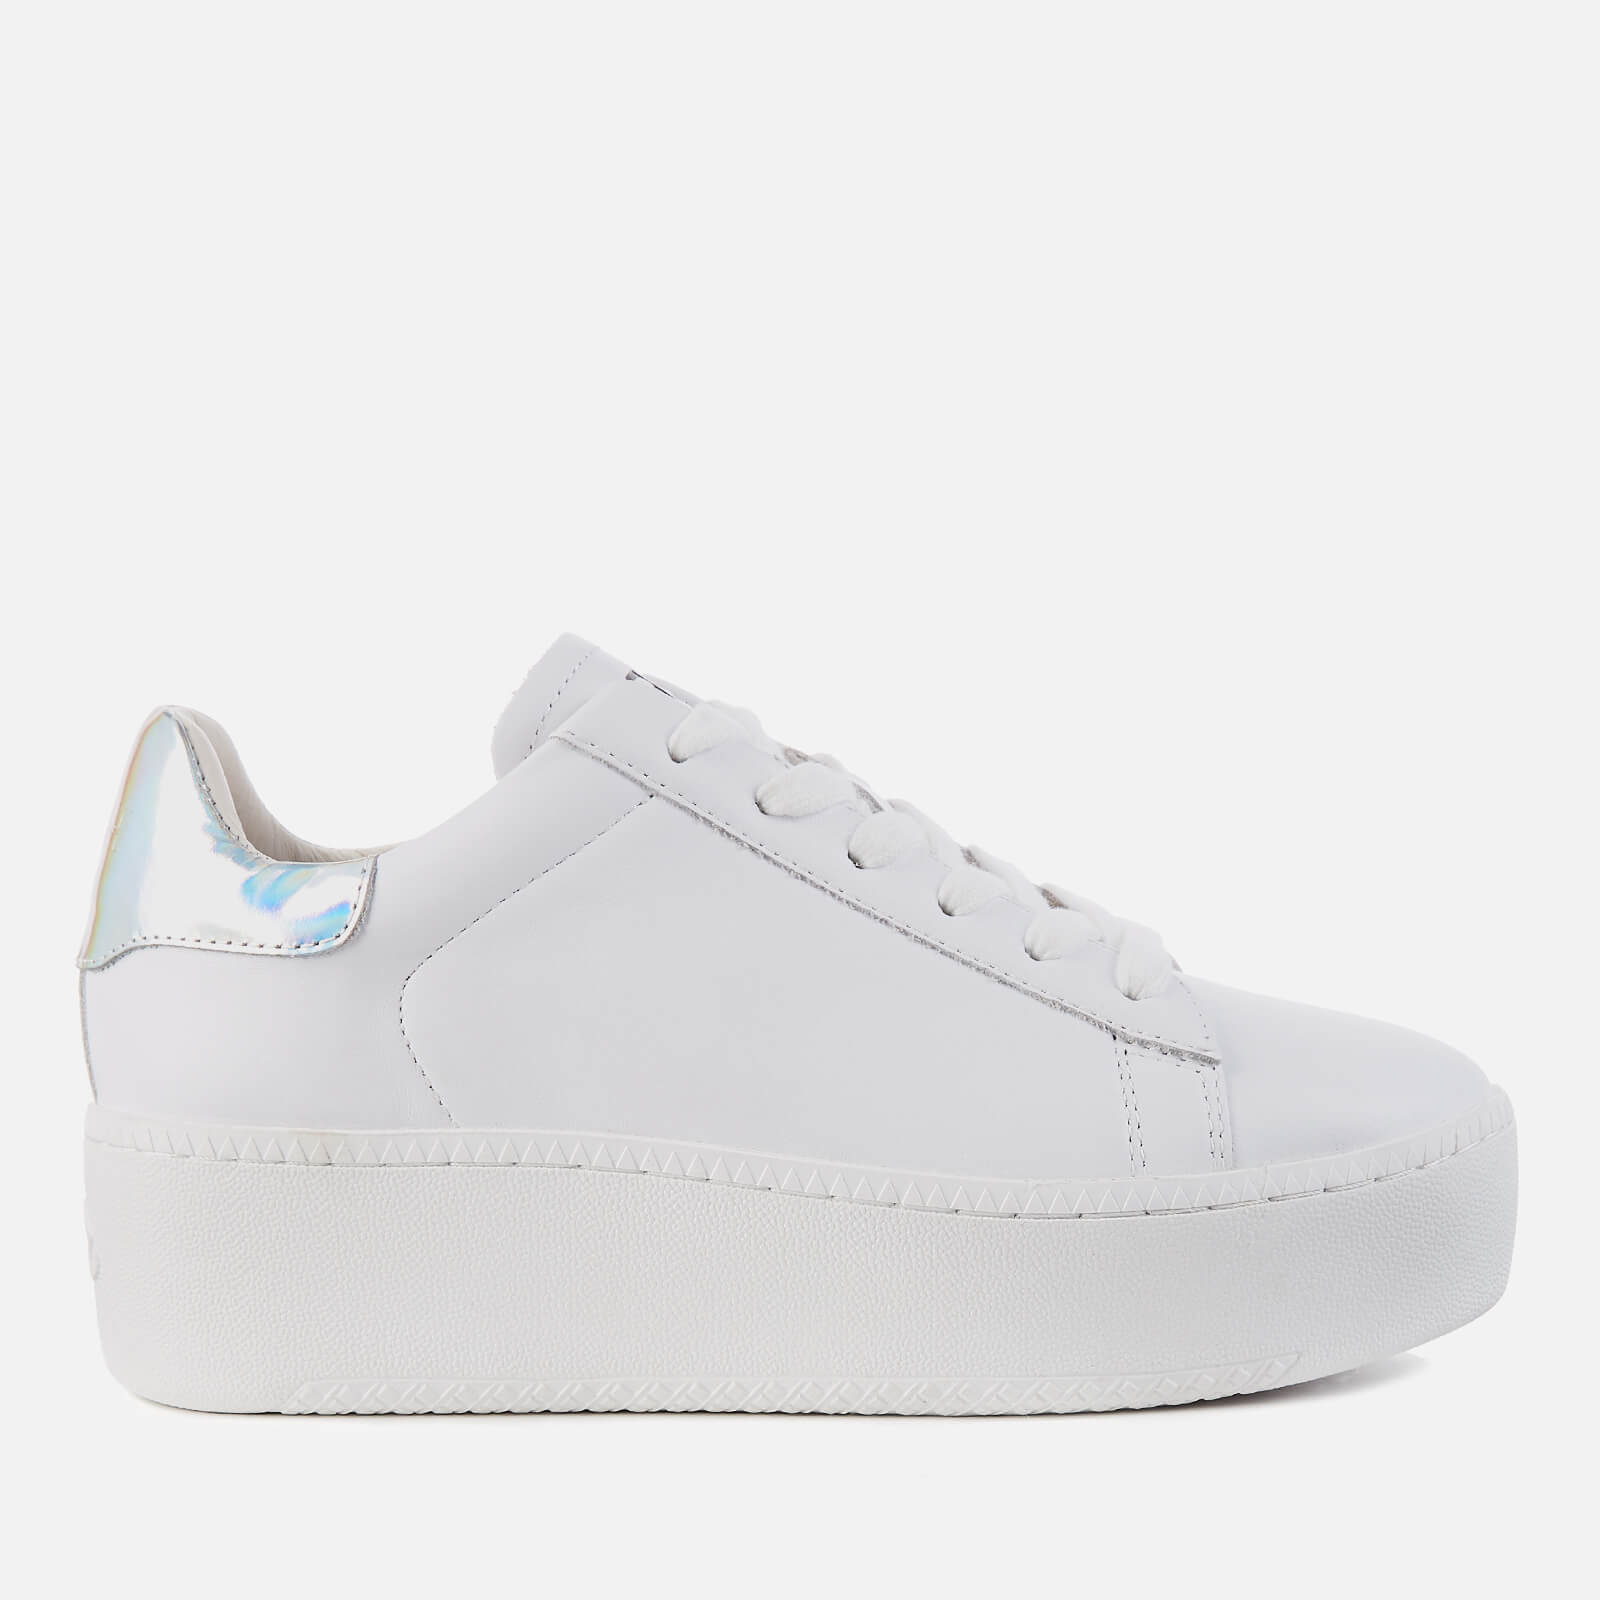 Cult Flatform Trainers - White/Silver 